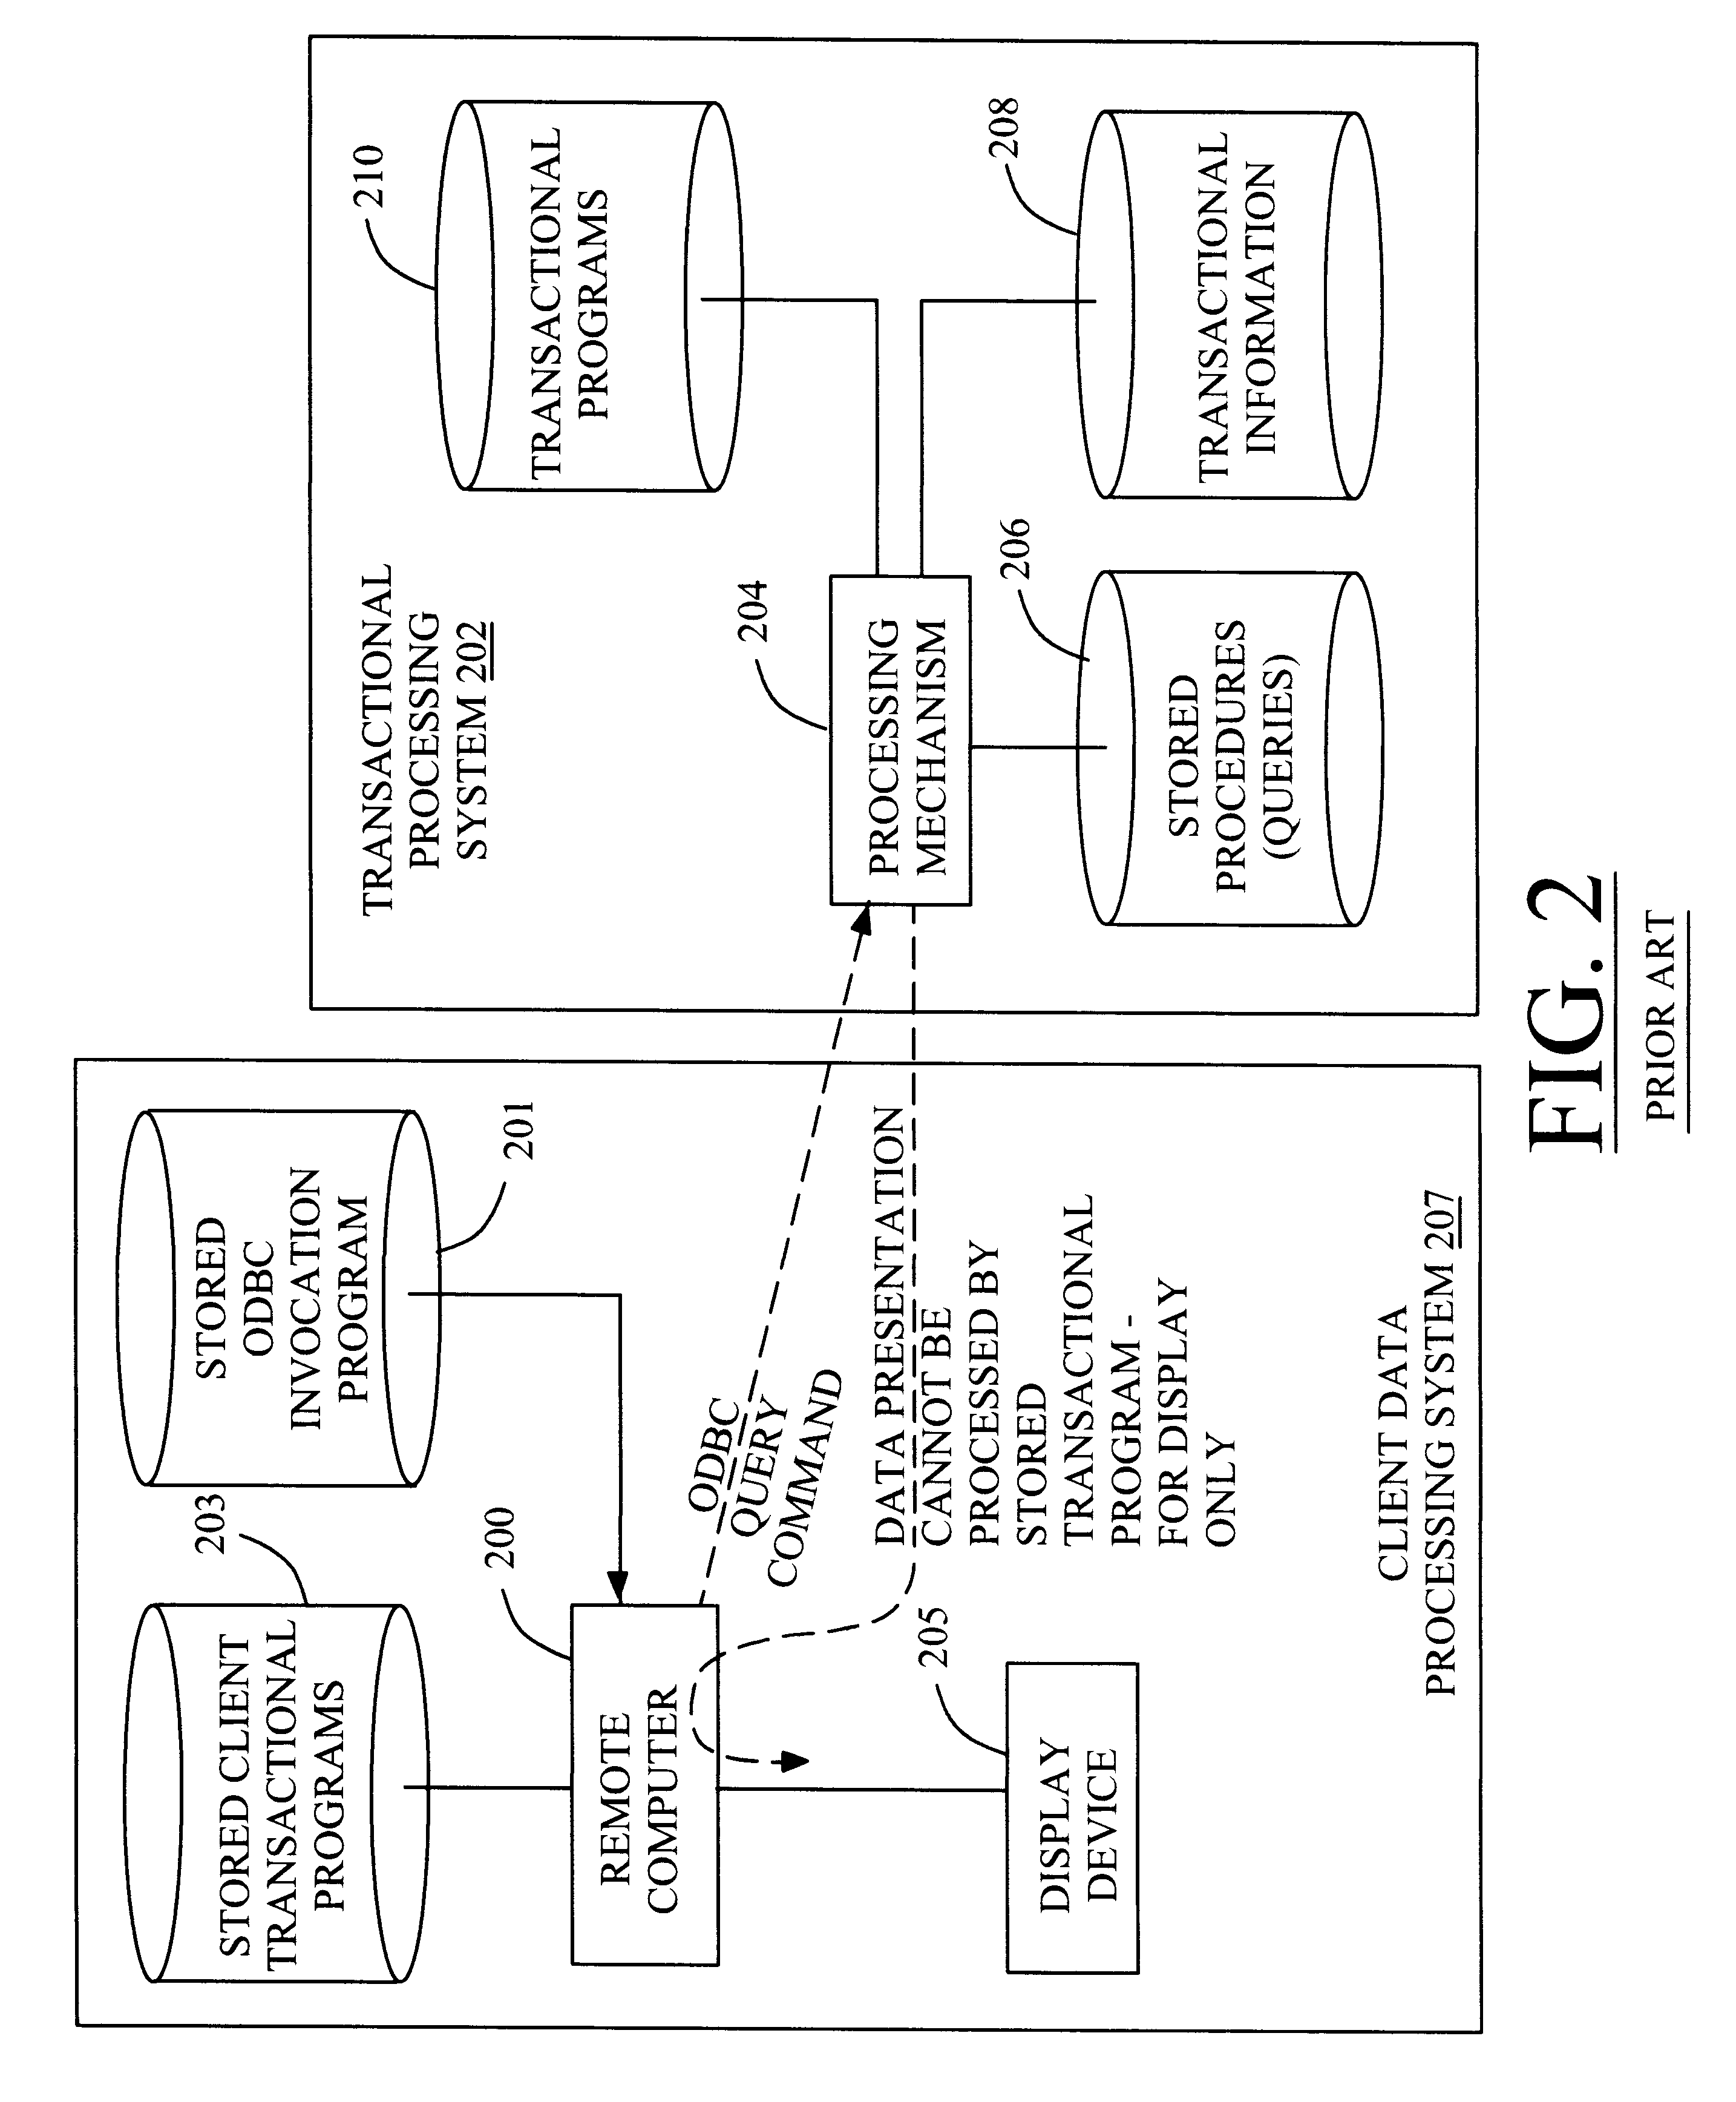 System for invocation of CICS programs as database stored procedures